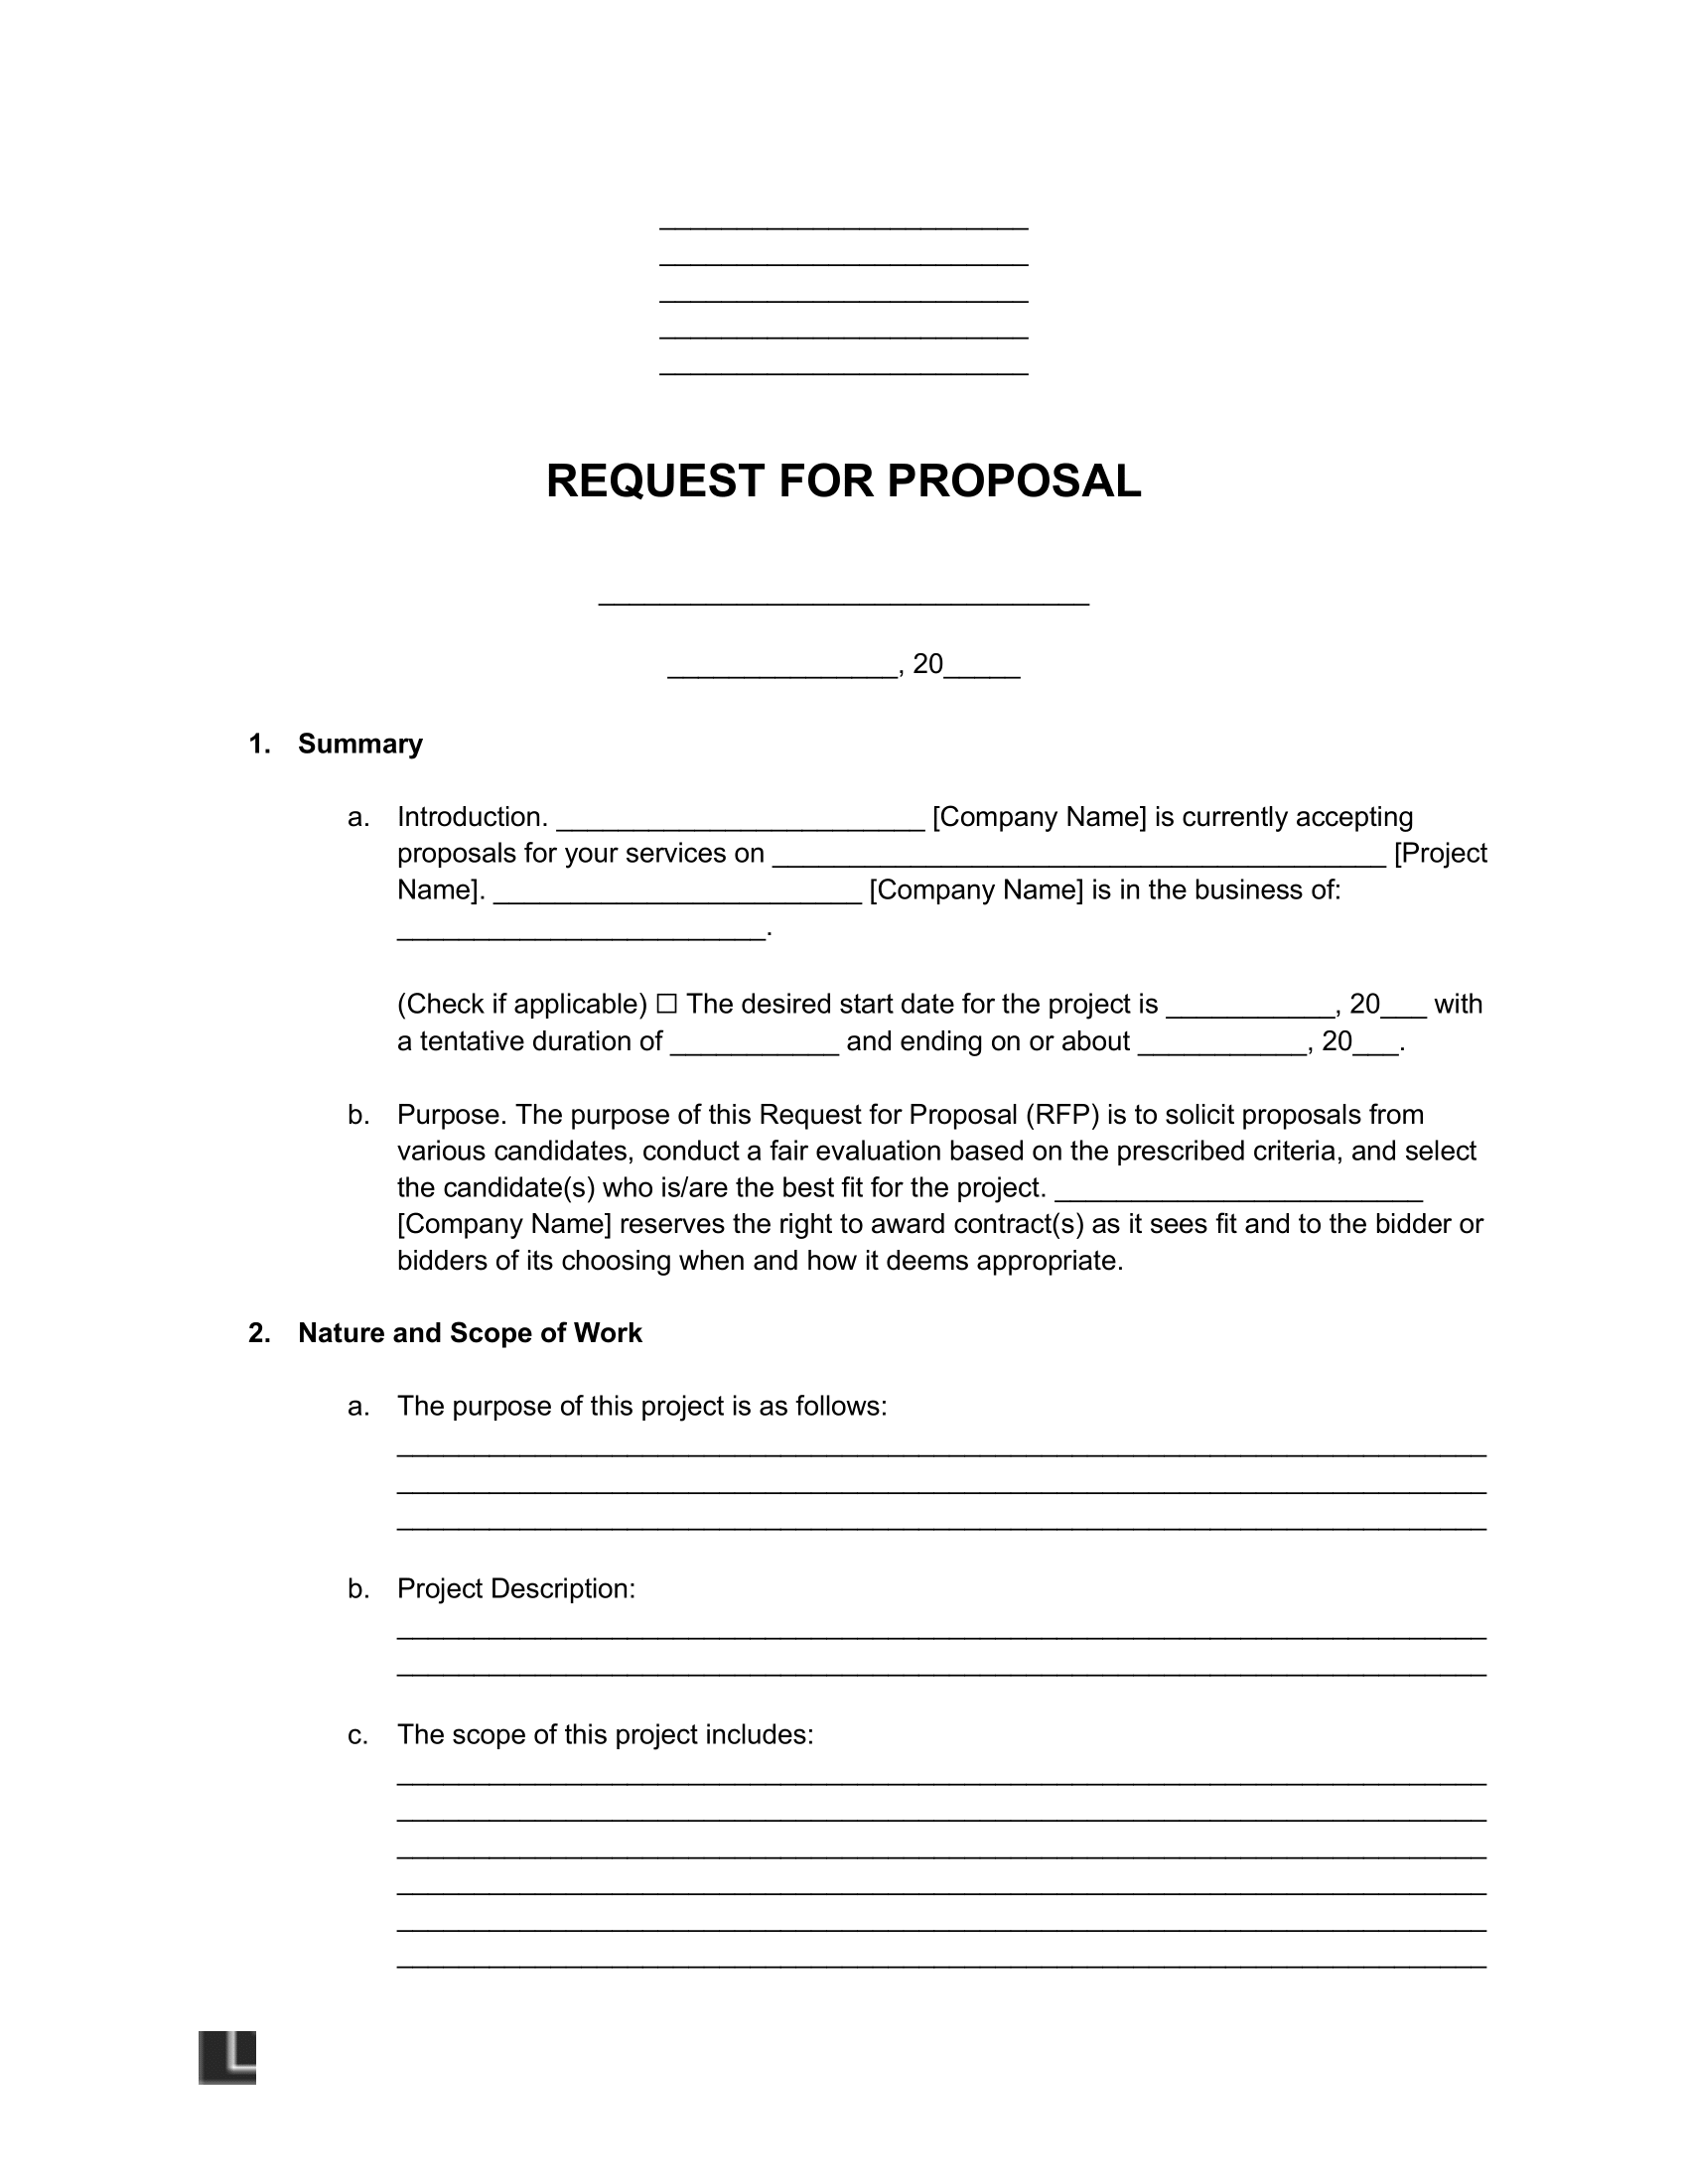 Request for Proposal (RFP) Template